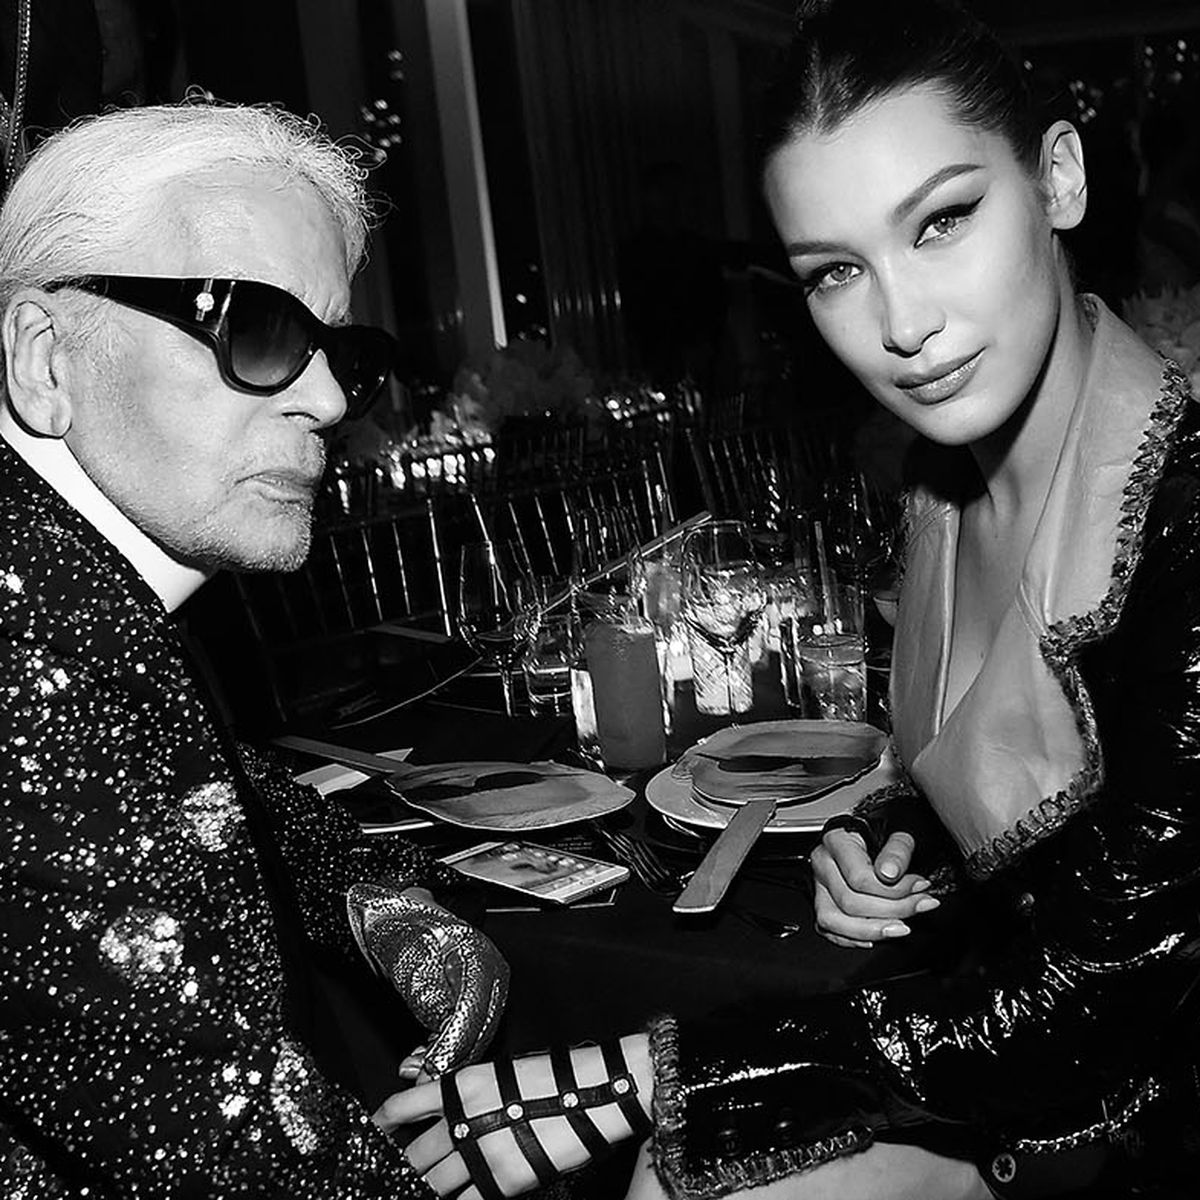 Celebrities pay tribute to Karl Lagerfeld who died aged 85: Gigi